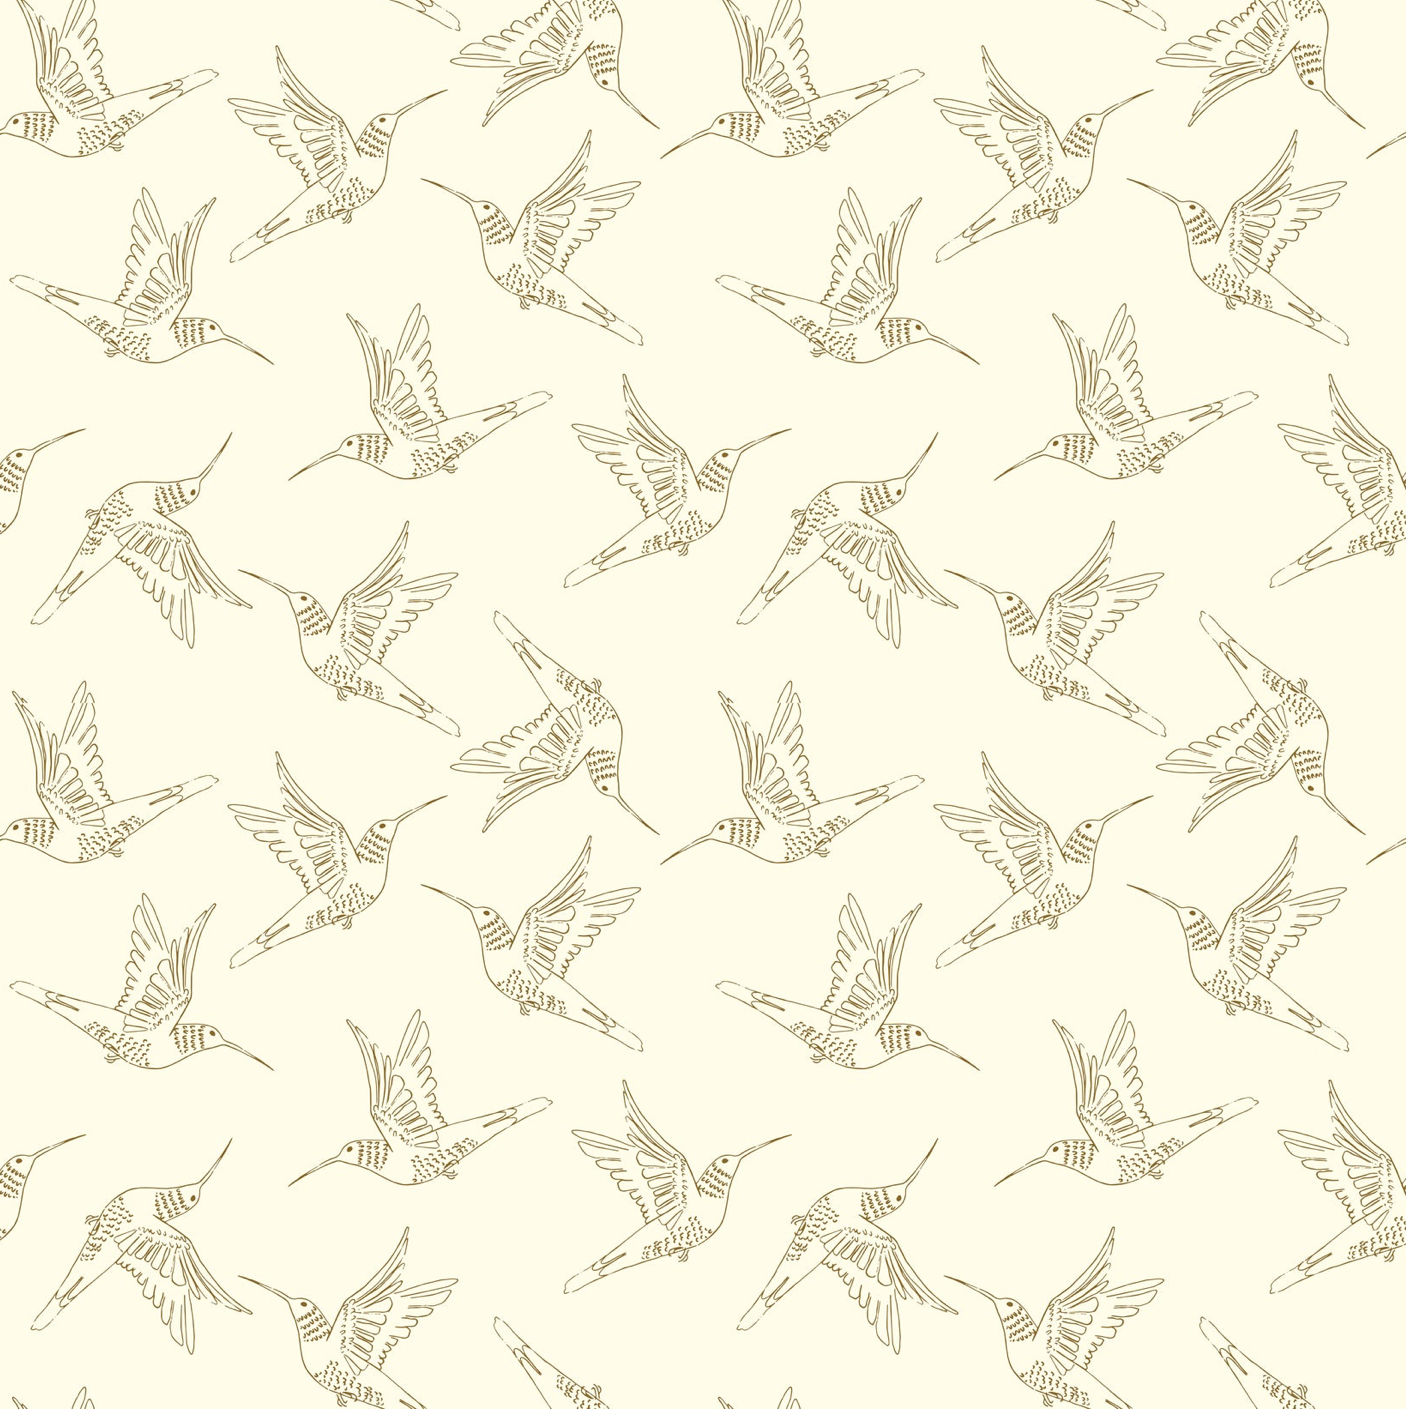 Serenity Blooms, Hummingbird Dance Cream, SR24504, sold by the 1/2 yard, *PREORDER